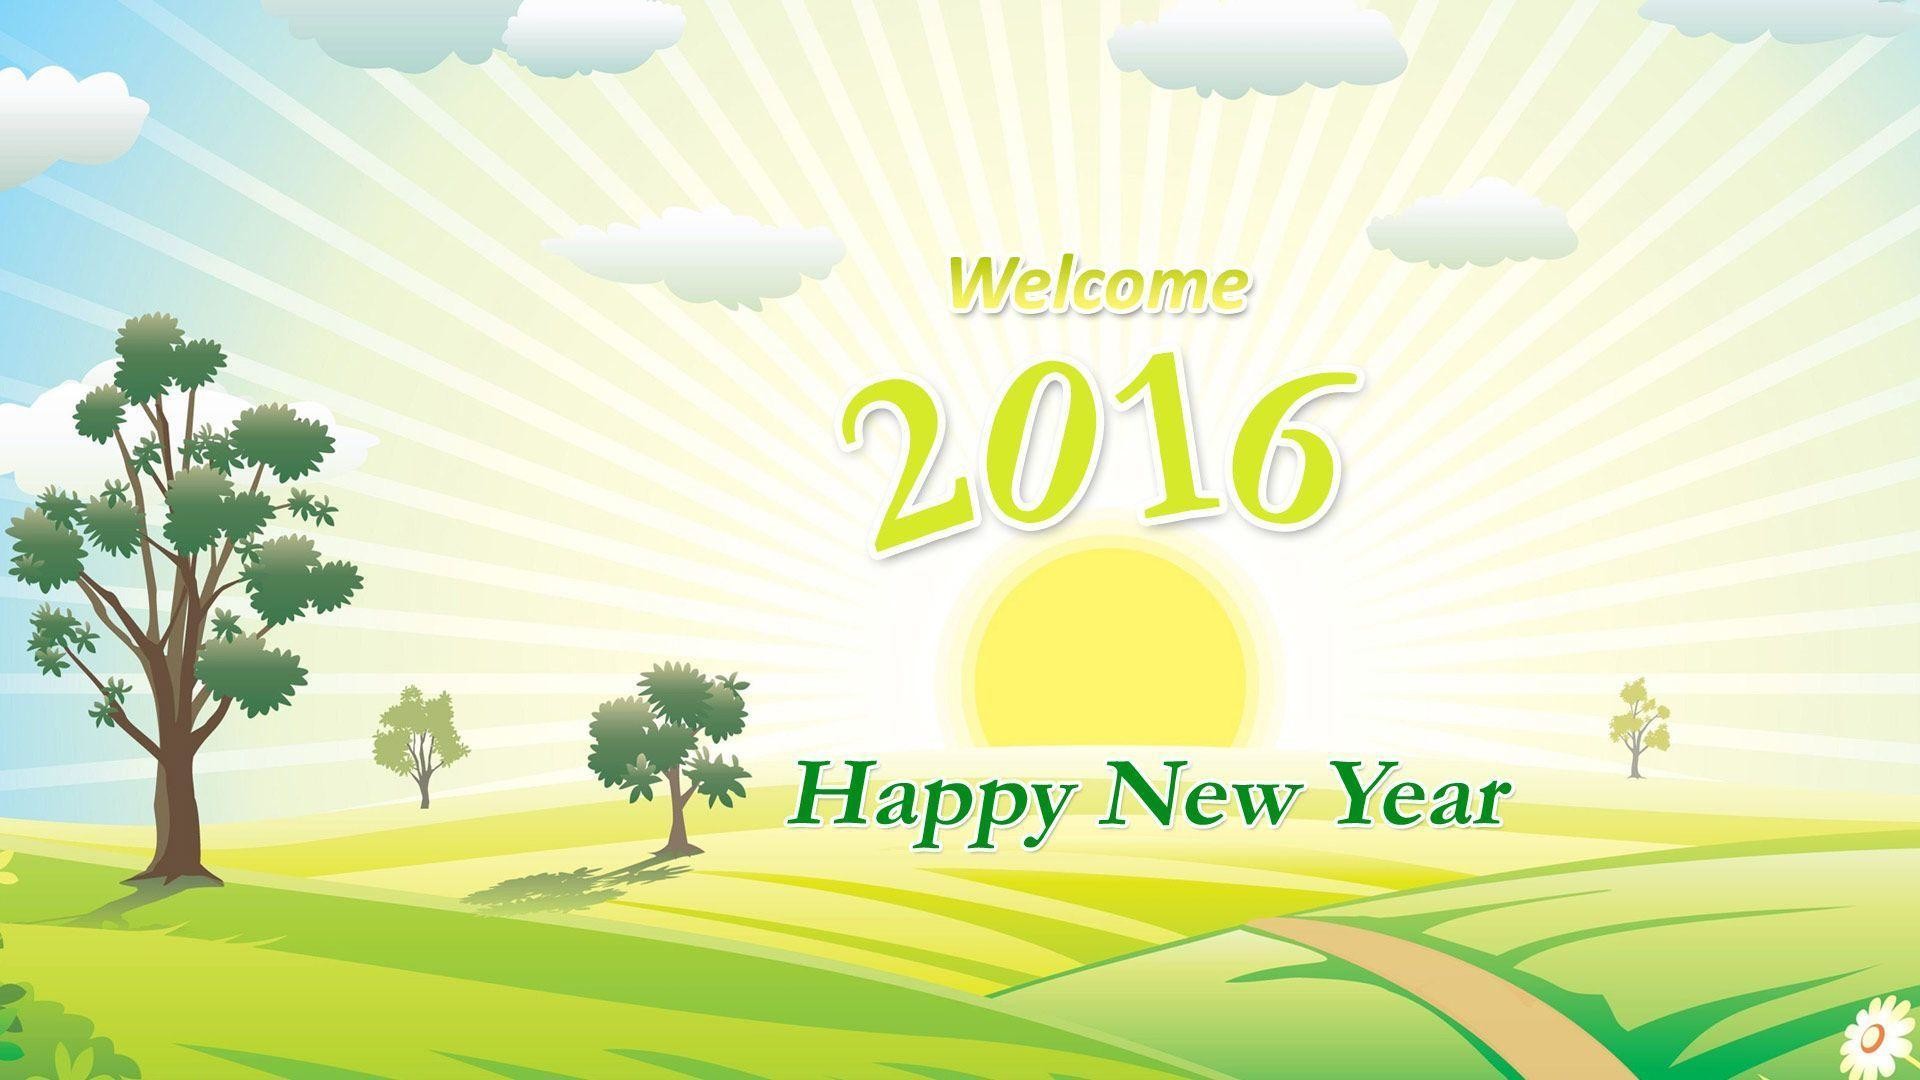 1920x1080 Happy New Year welcome 2016 wallpaper – Free full hd wallpapers .